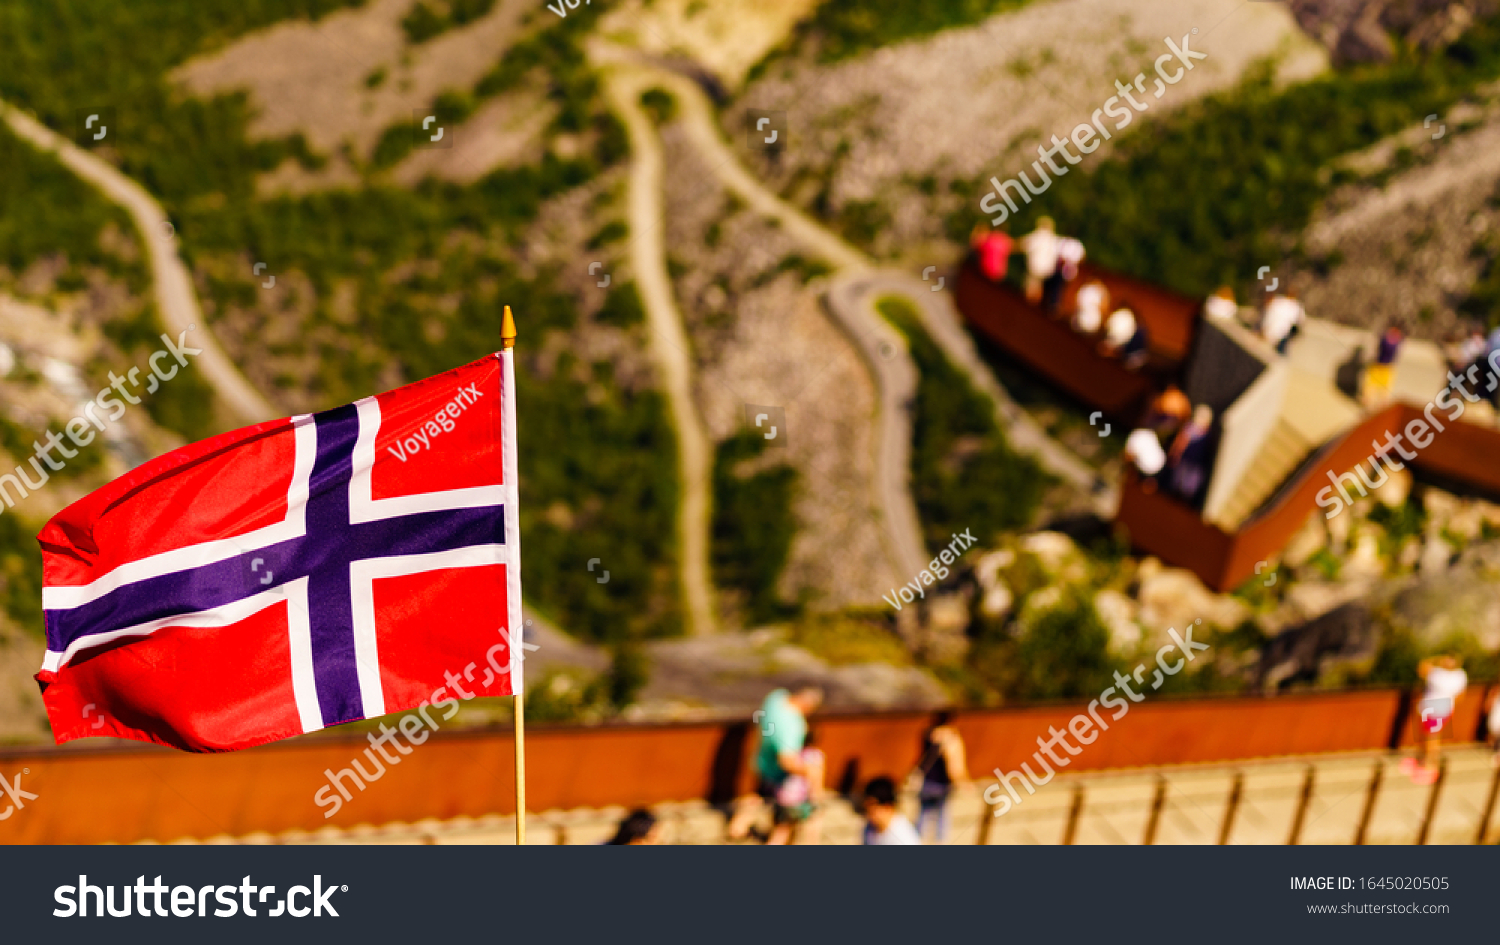 Trollstigen mountain road landscape in Norway, Europe. Norwegian flag waving and many tourists people on viewing platform in background. National tourist route. #1645020505